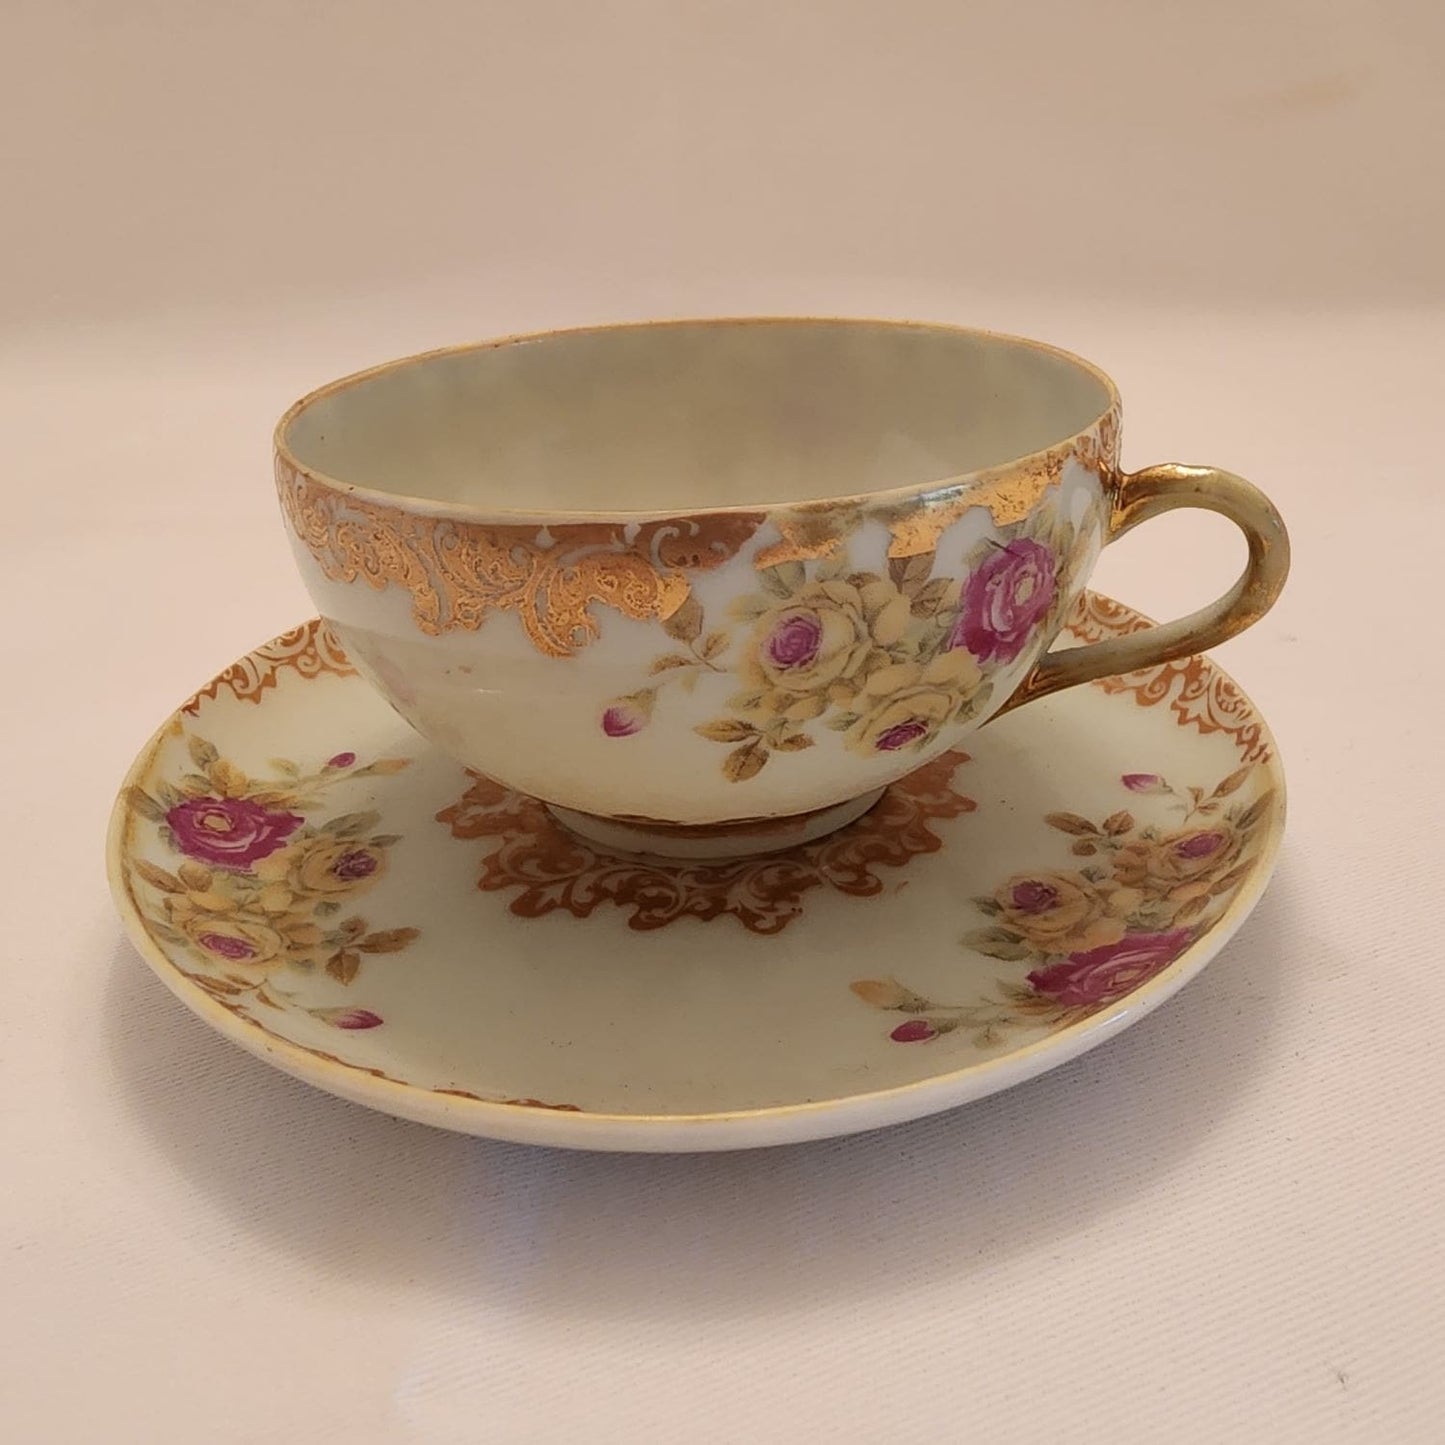 A cup and saucer with a delicate gold trim, adding an elegant touch to the table setting.